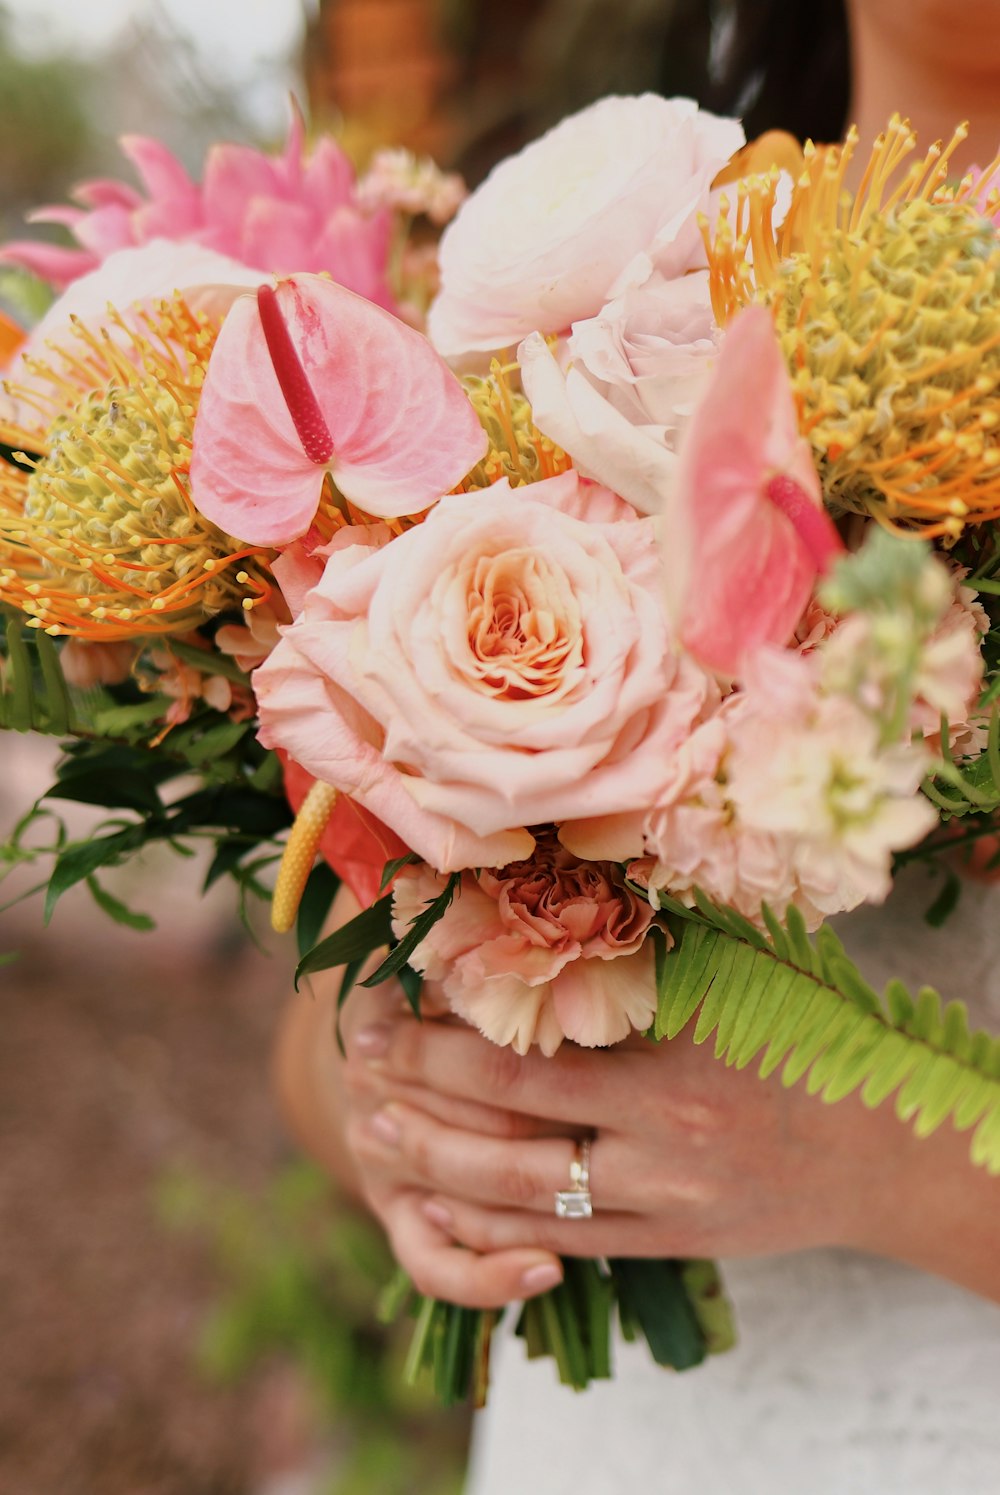 a close up of a person holding a bouquet of flowers